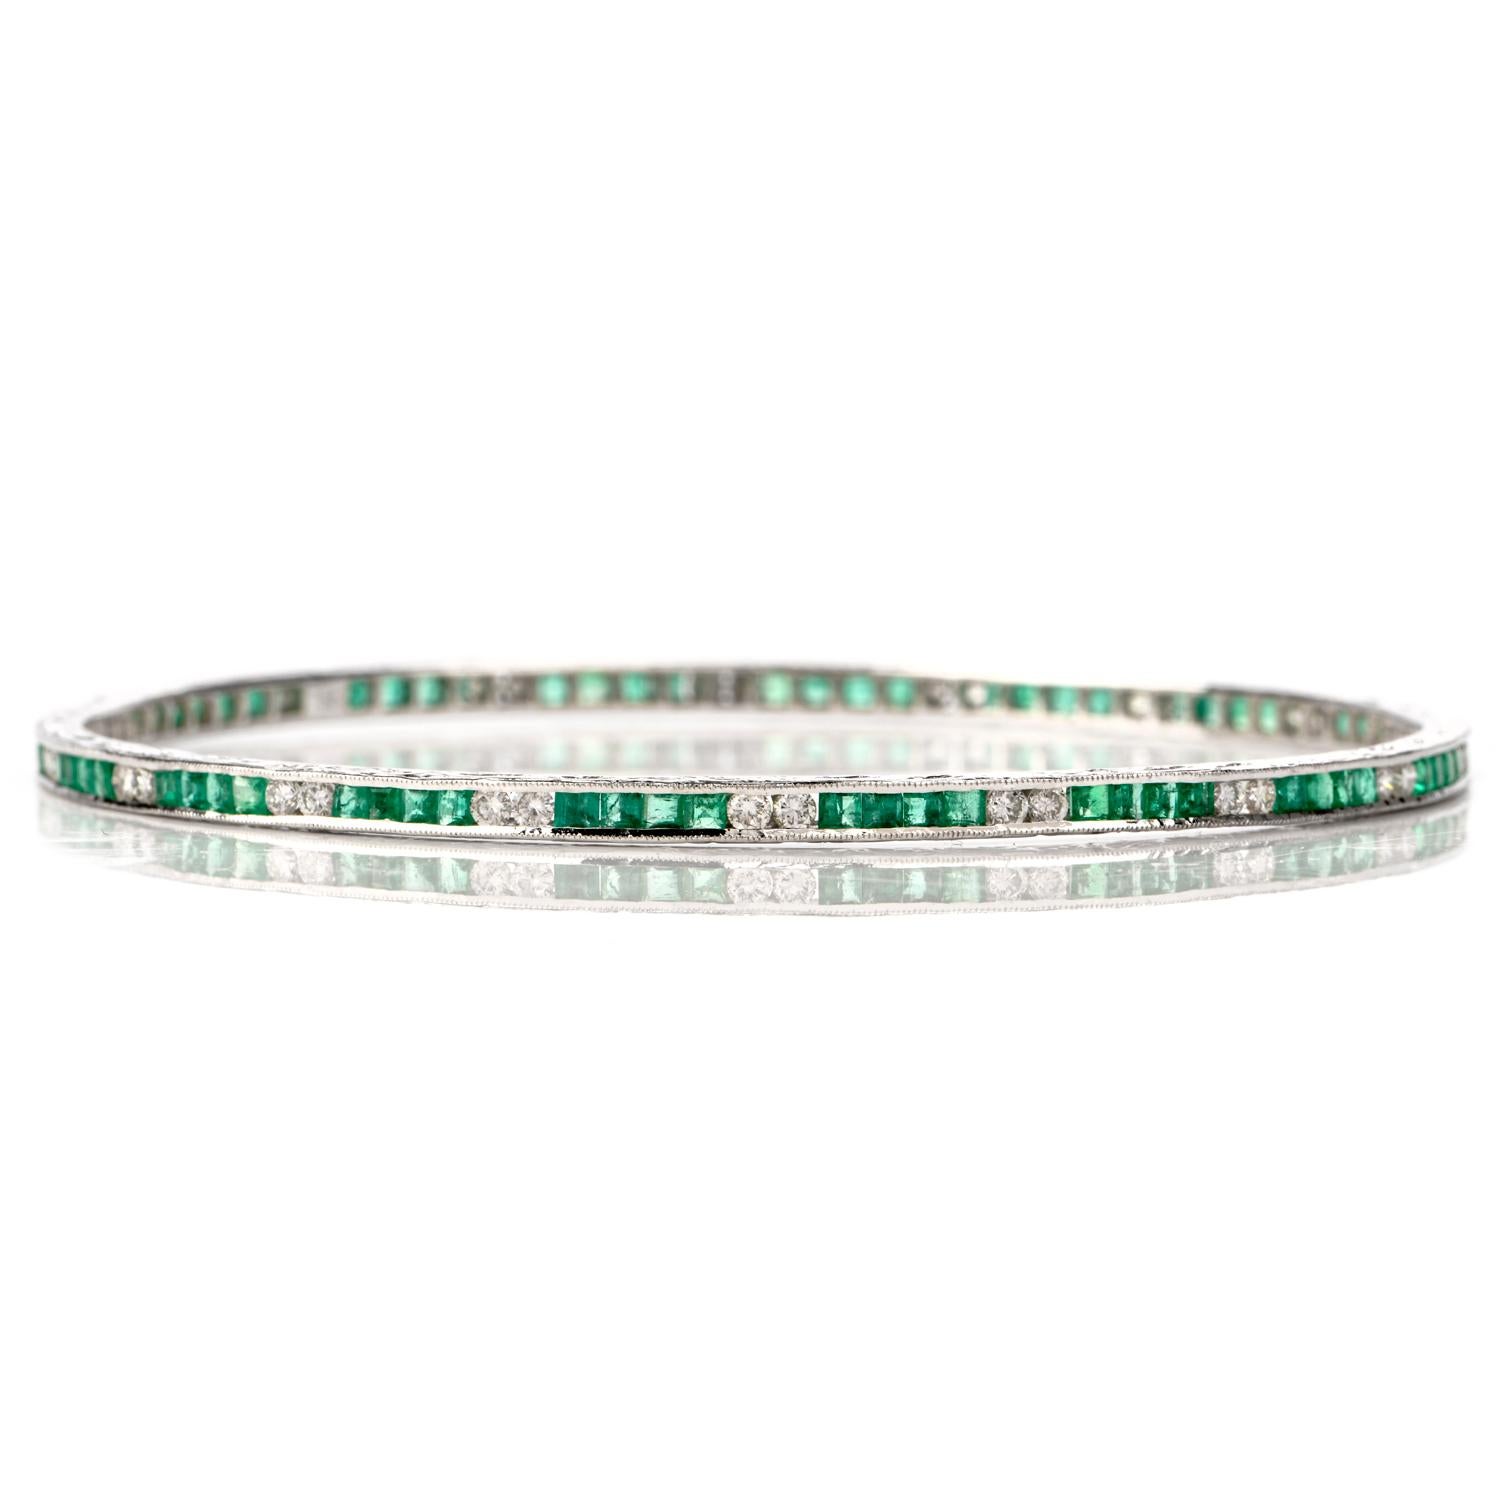 This stunning emerald and diamond bangle bracelet is crafted in 18-karat white gold. Composed of a pattern of four channel-set emerald-cut emeralds and two channel-set round brilliant diamonds. The 72 genuine emeralds collectively weigh